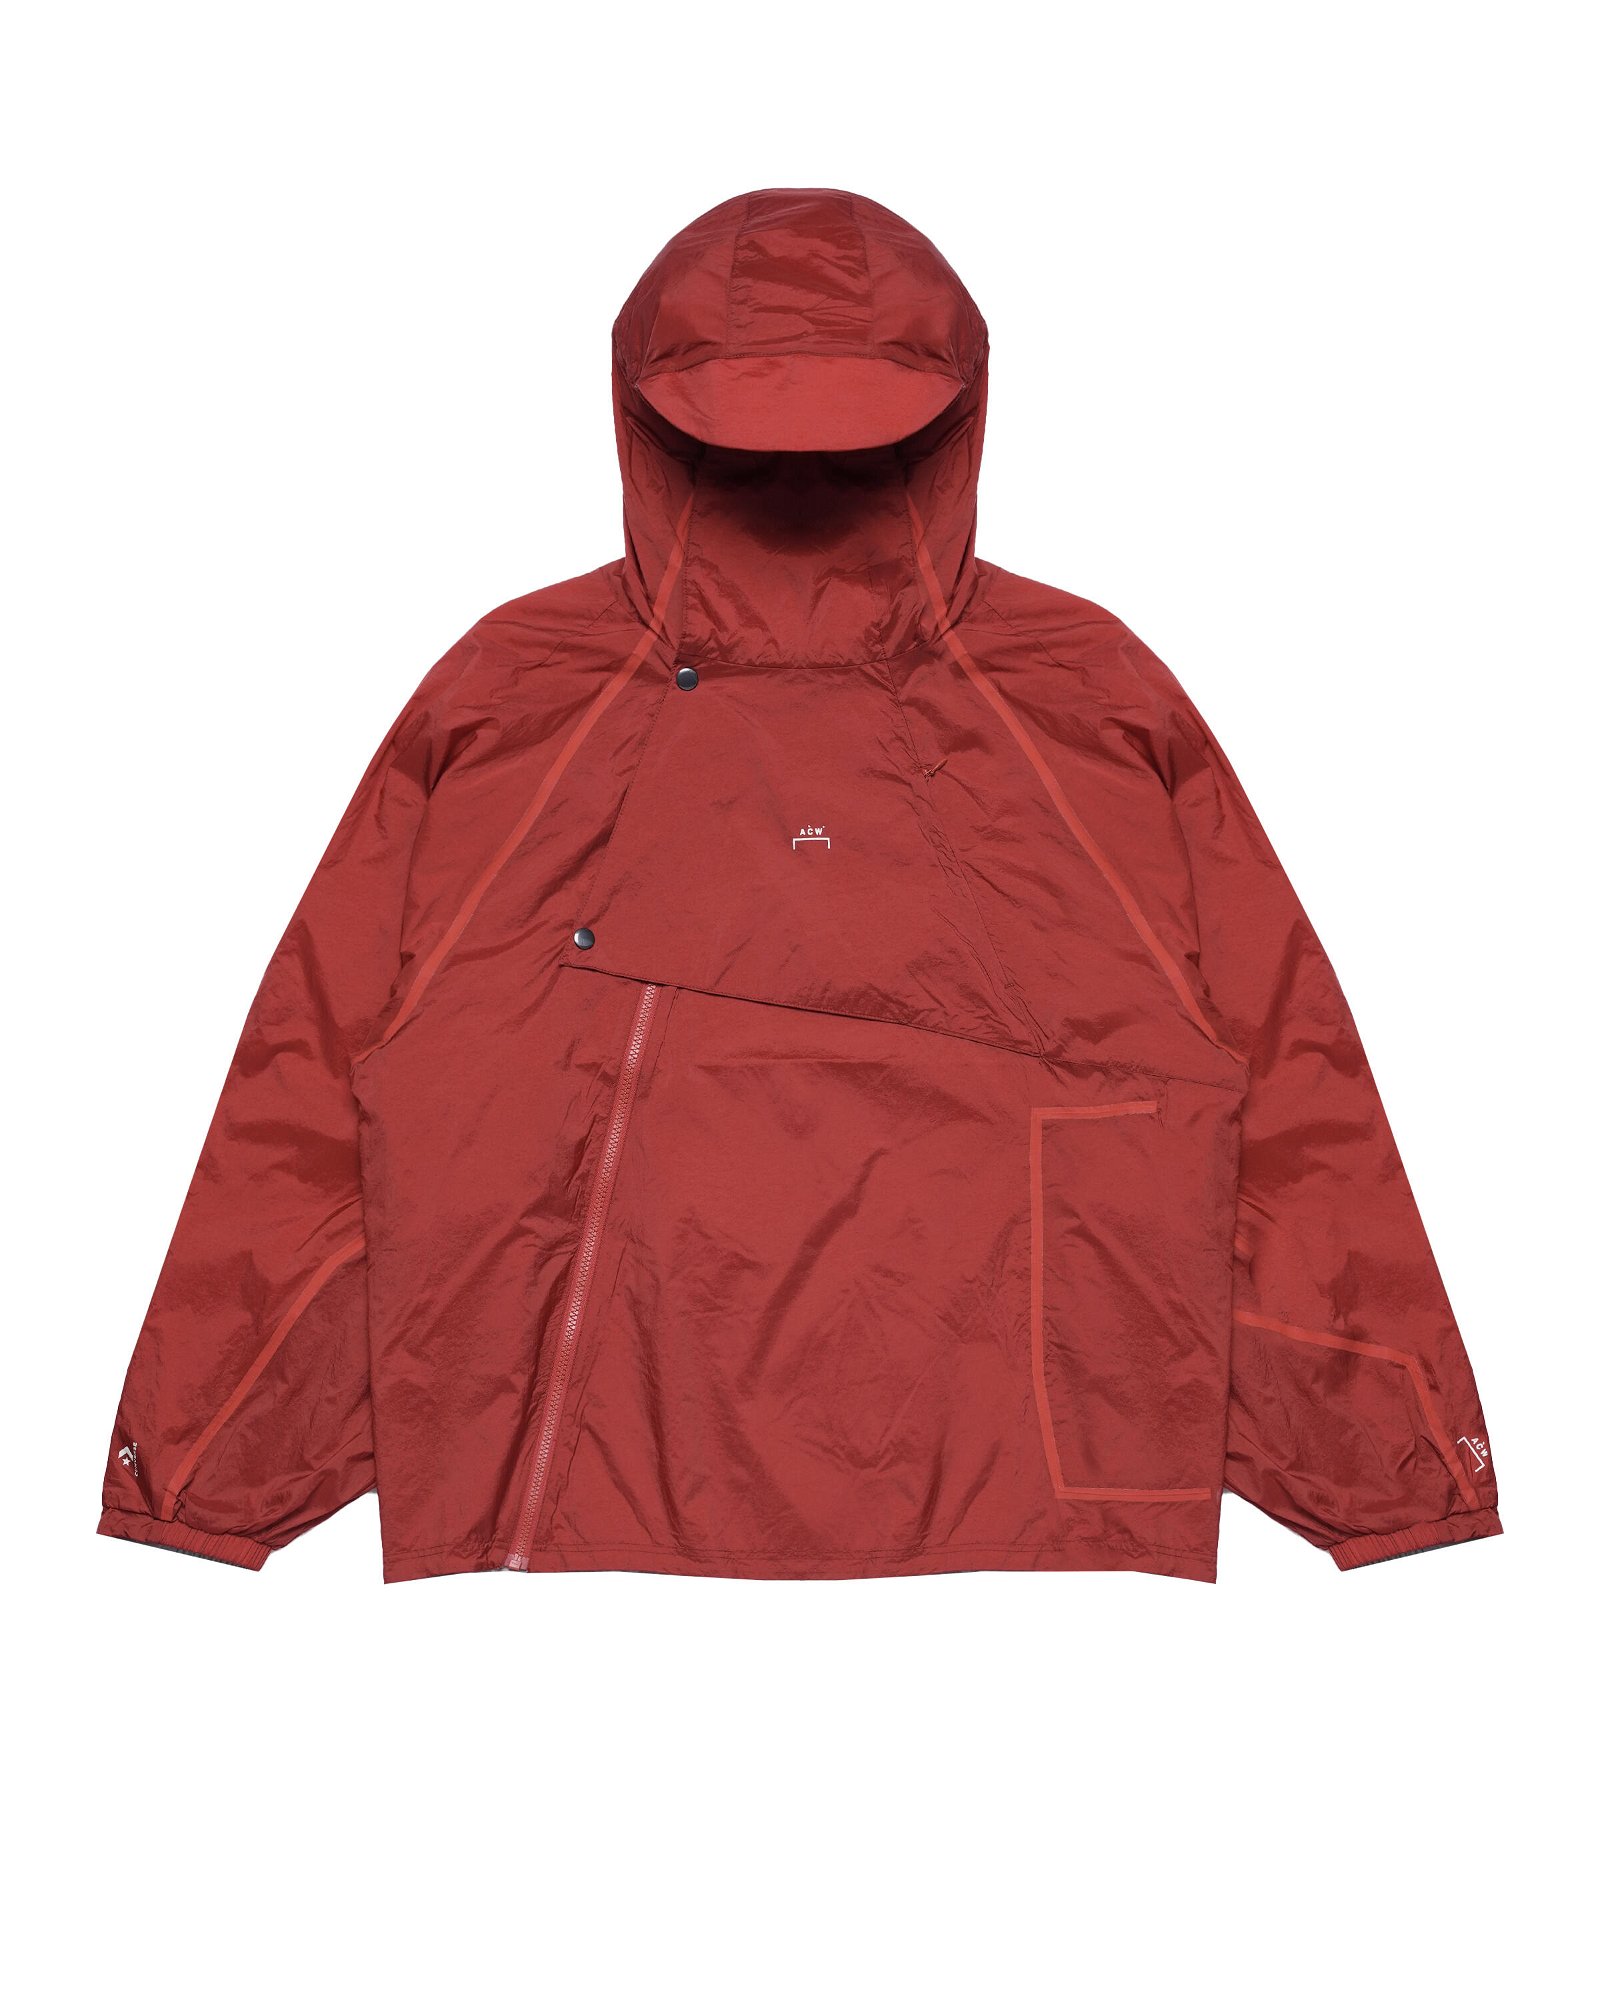 A-COLD-WALL* x Reversible WIND JACKET